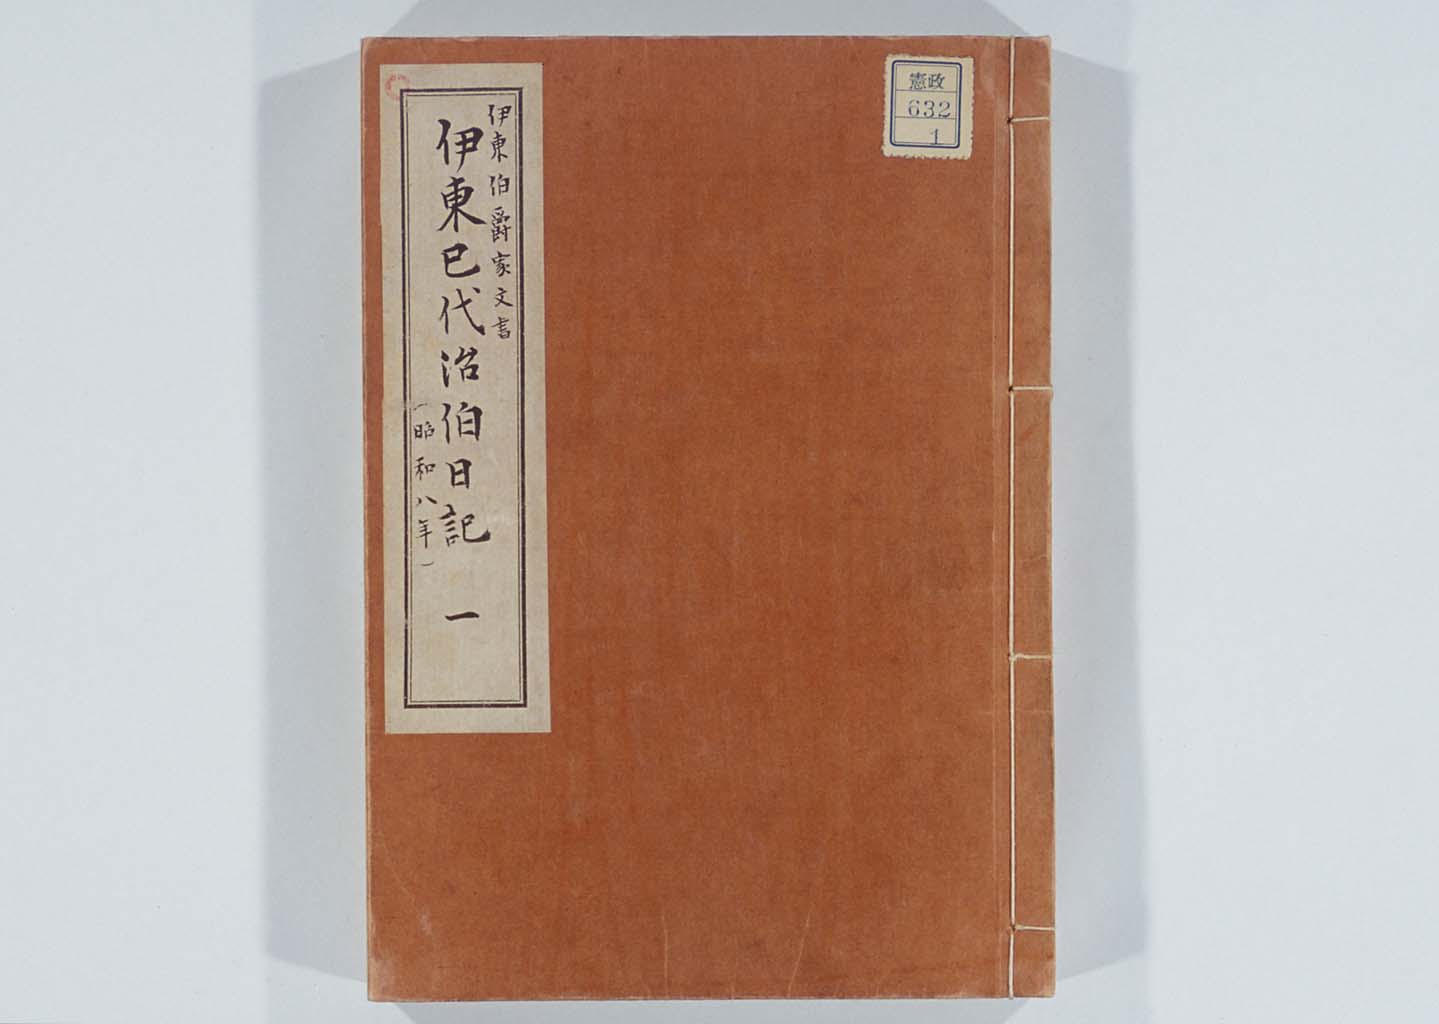 Miyoji Ito's diary ( Transcript ) February, 1933 (Showa 8) Constitutional Government Documents Collection, #632-1 ( Larger1-4 )